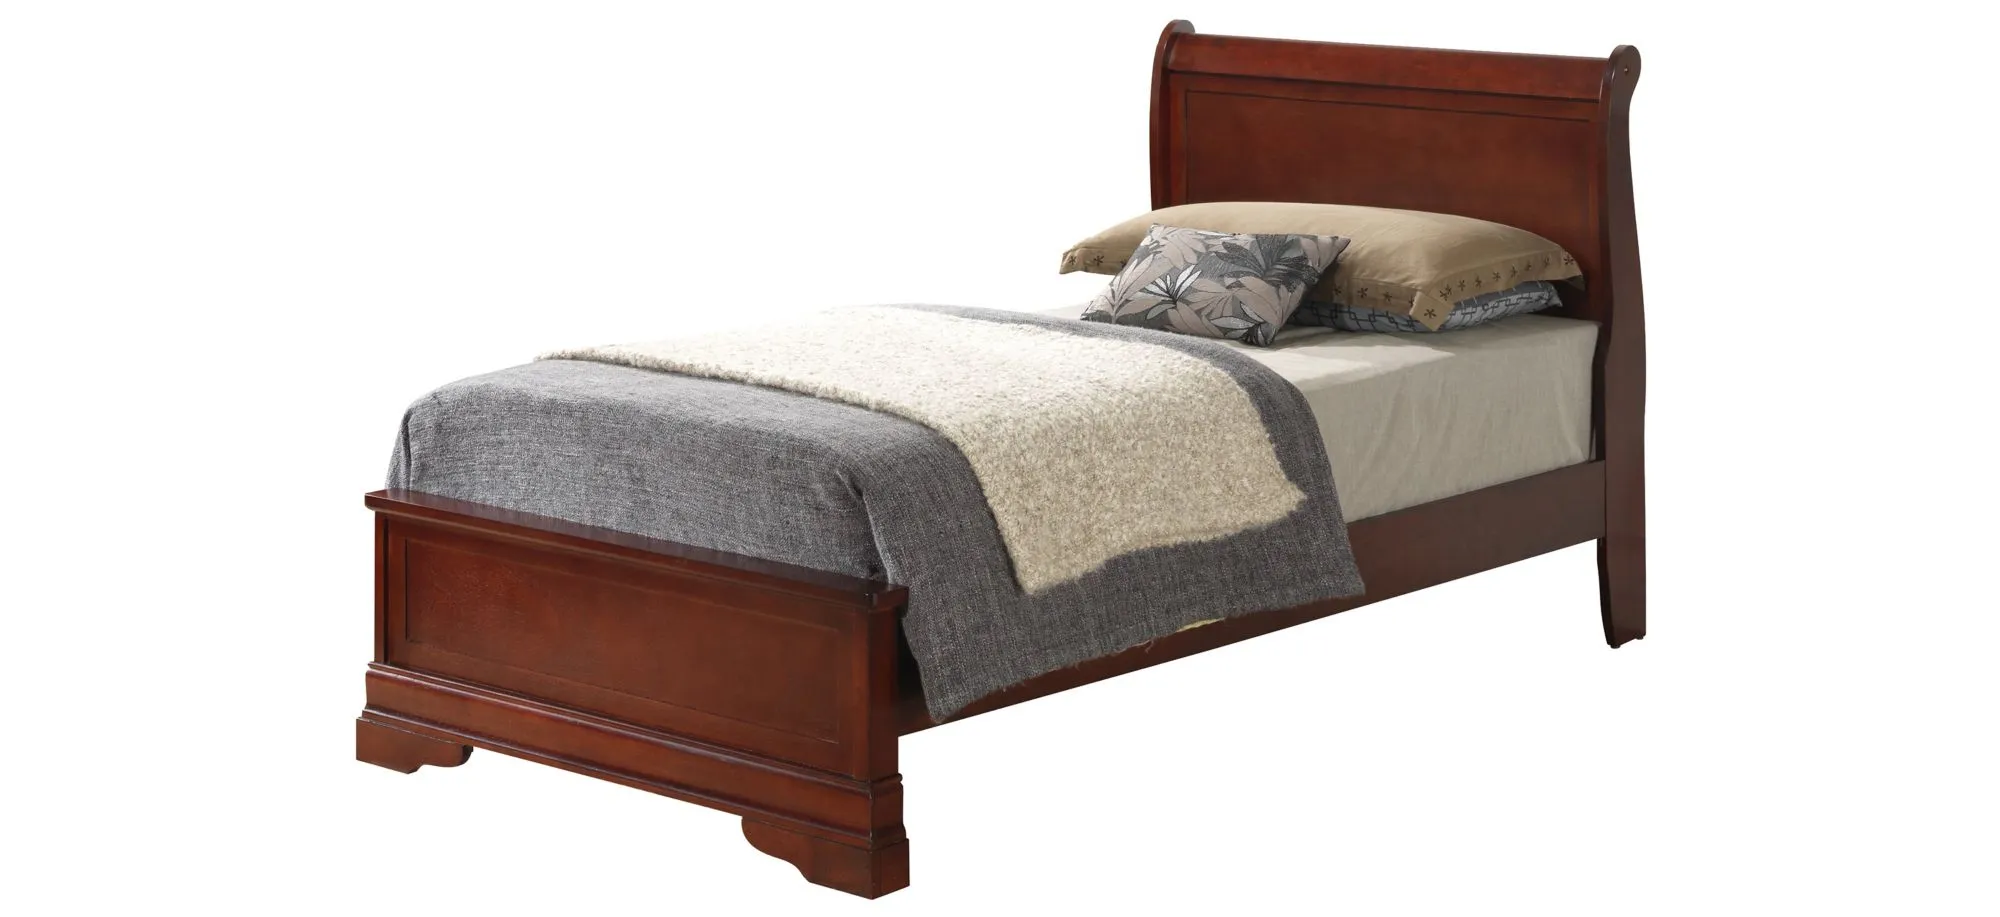 Rossie Panel Bed in Cherry by Glory Furniture